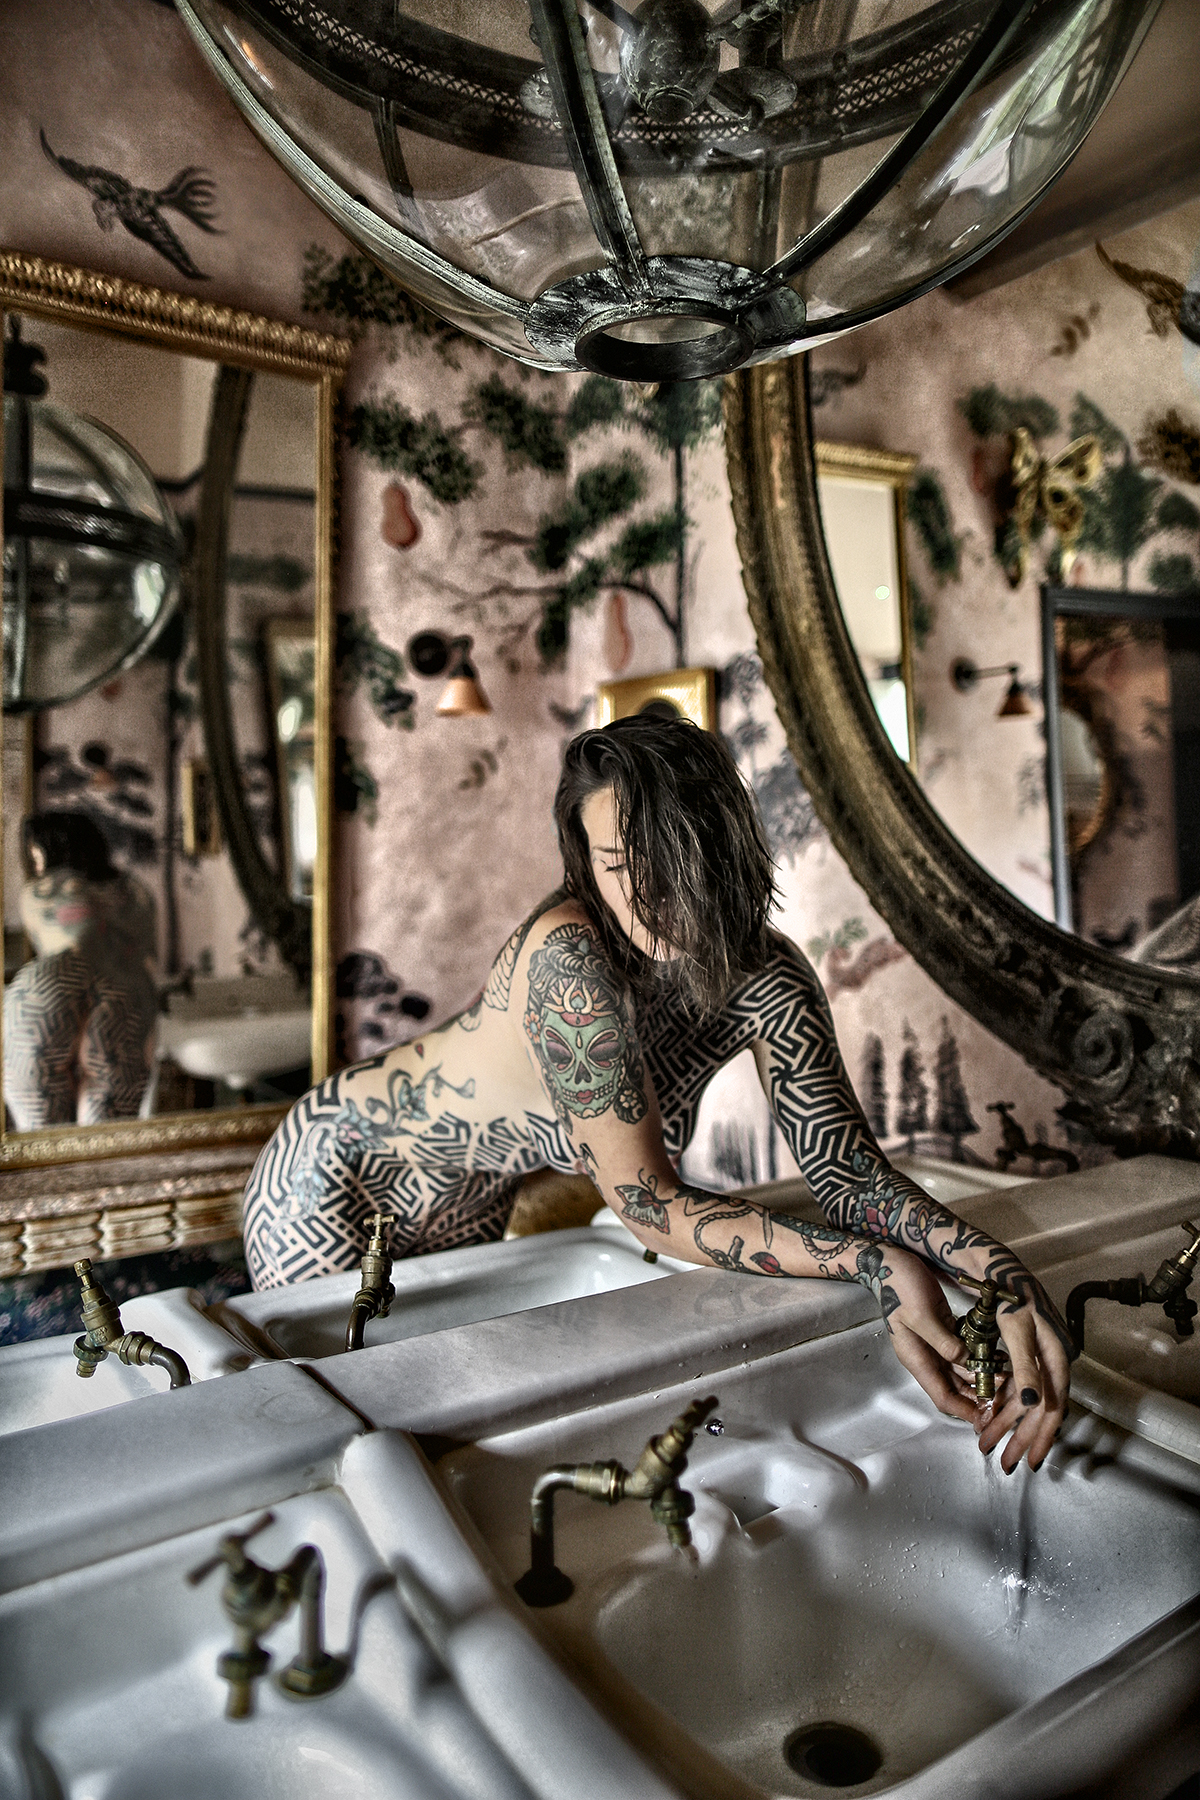 A woman covered in tattoos leaning on a bath with a mirror behind her